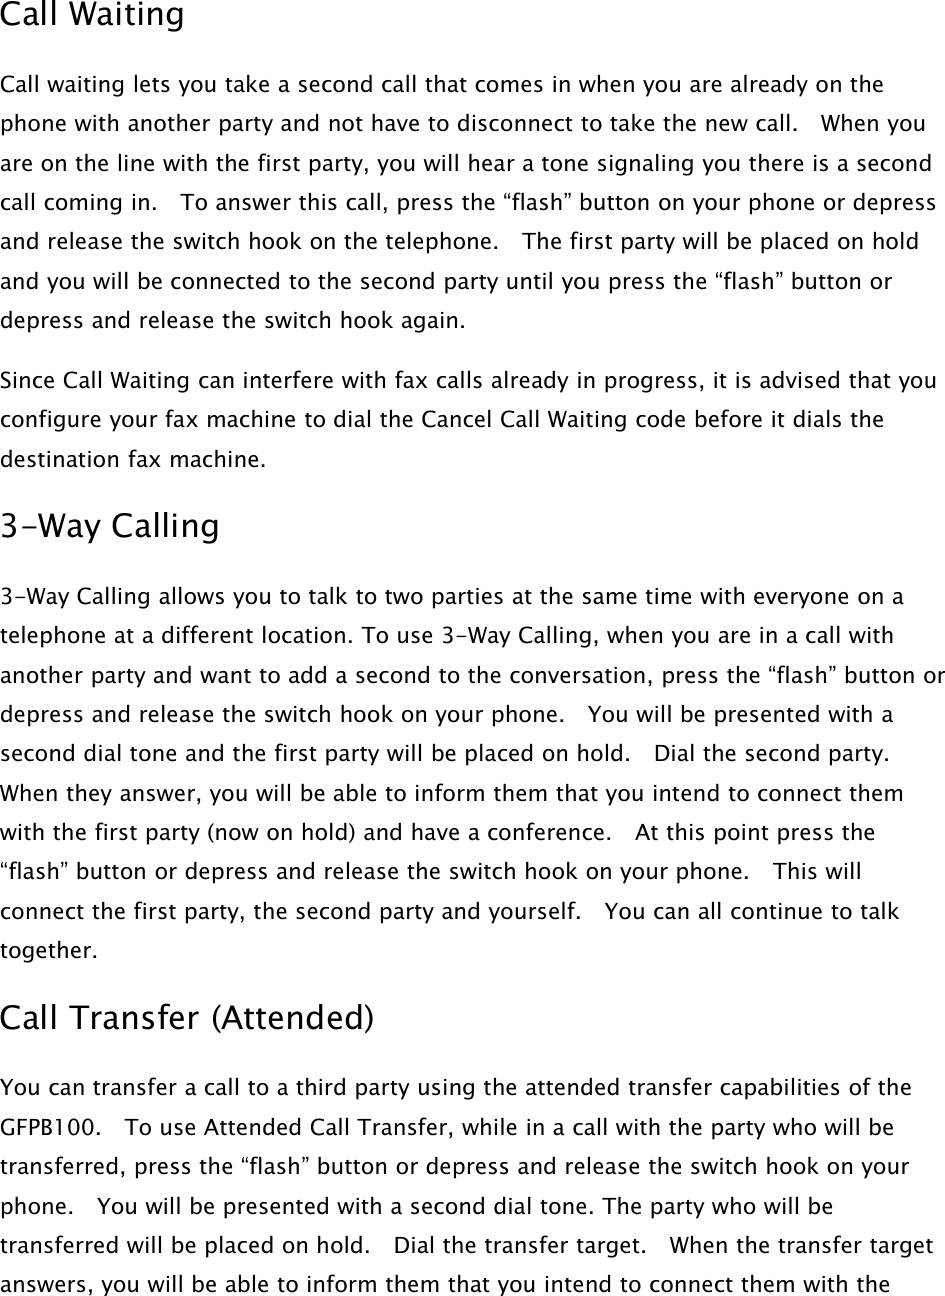 Call WaitingCall waiting lets you take a second call that comes in when you are already on thephone with another party and not have to disconnect to take the new call. When youare on the line with the first party, you will hear a tone signaling you there is a secondcall coming in. To answer this call, press the “flash” button on your phone or depressand release the switch hook on the telephone. The first party will be placed on holdand you will be connected to the second party until you press the “flash” button ordepress and release the switch hook again.Since Call Waiting can interfere with fax calls already in progress, it is advised that youconfigure your fax machine to dial the Cancel Call Waiting code before it dials thedestination fax machine.3-Way Calling3-Way Calling allows you to talk to two parties at the same time with everyone on atelephone at a different location. To use 3-Way Calling, when you are in a call withanother party and want to add a second to the conversation, press the “flash” button ordepress and release the switch hook on your phone. You will be presented with asecond dial tone and the first party will be placed on hold. Dial the second party.When they answer, you will be able to inform them that you intend to connect themwith the first party (now on hold) and have a conference. At this point press the“flash” button or depress and release the switch hook on your phone. This willconnect the first party, the second party and yourself. You can all continue to talktogether.Call Transfer (Attended)You can transfer a call to a third party using the attended transfer capabilities of theGFPB100. To use Attended Call Transfer, while in a call with the party who will betransferred, press the “flash” button or depress and release the switch hook on yourphone. You will be presented with a second dial tone. The party who will betransferred will be placed on hold. Dial the transfer target. When the transfer targetanswers, you will be able to inform them that you intend to connect them with the